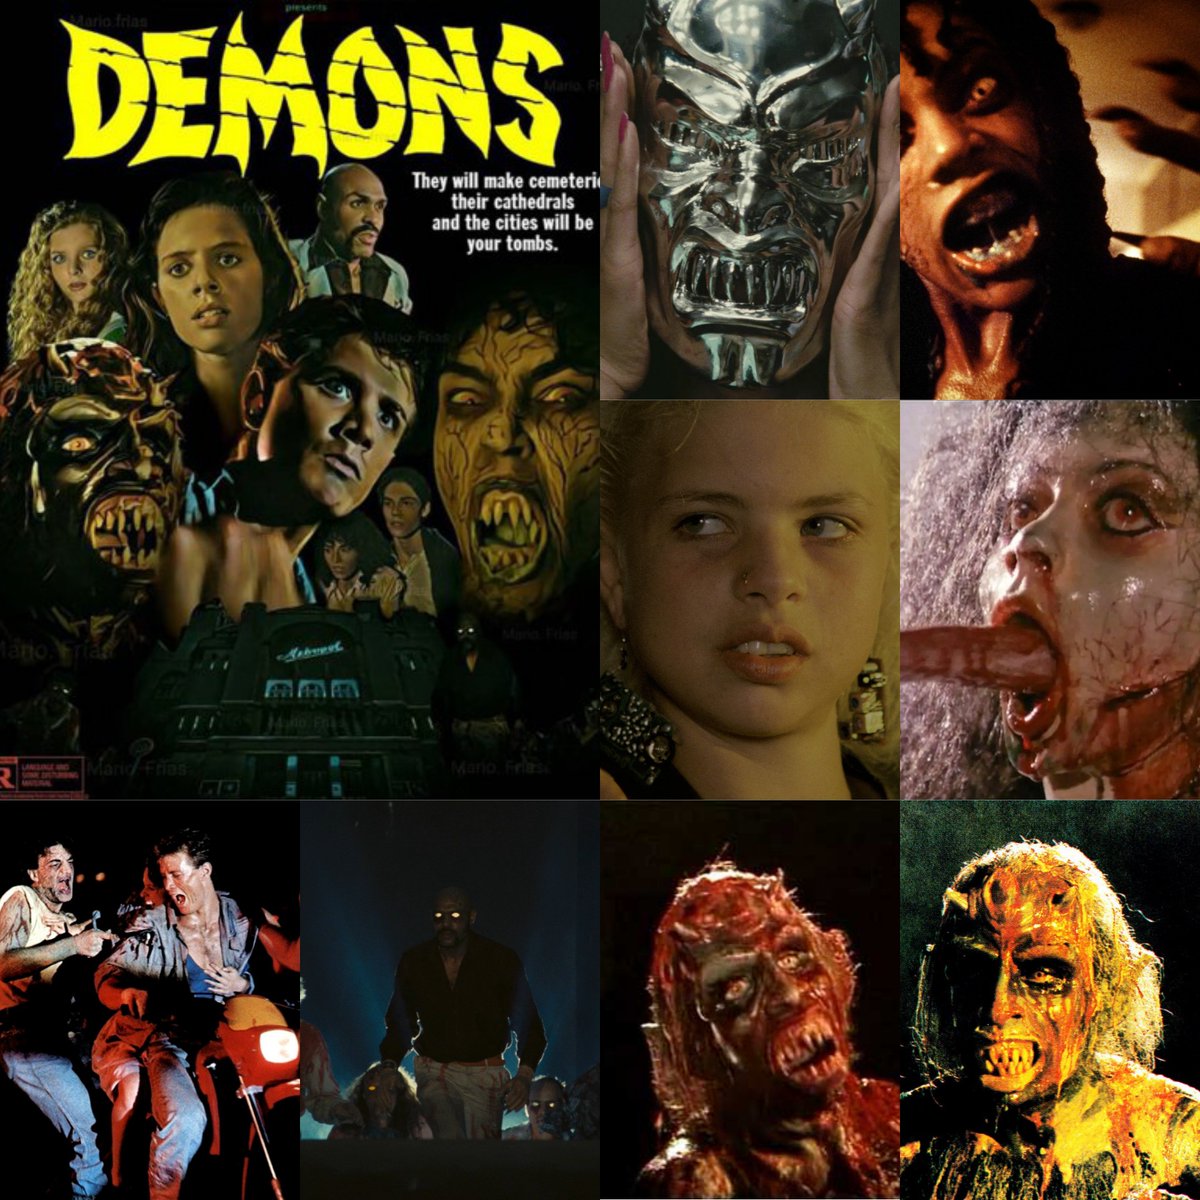 'Demons' a.k.a 'Dèmoni', directed by Lamberto Bava, was released on this day in 1986. Happy horror-versary! 💀🩸 #HorrorCommunity #MutantFam